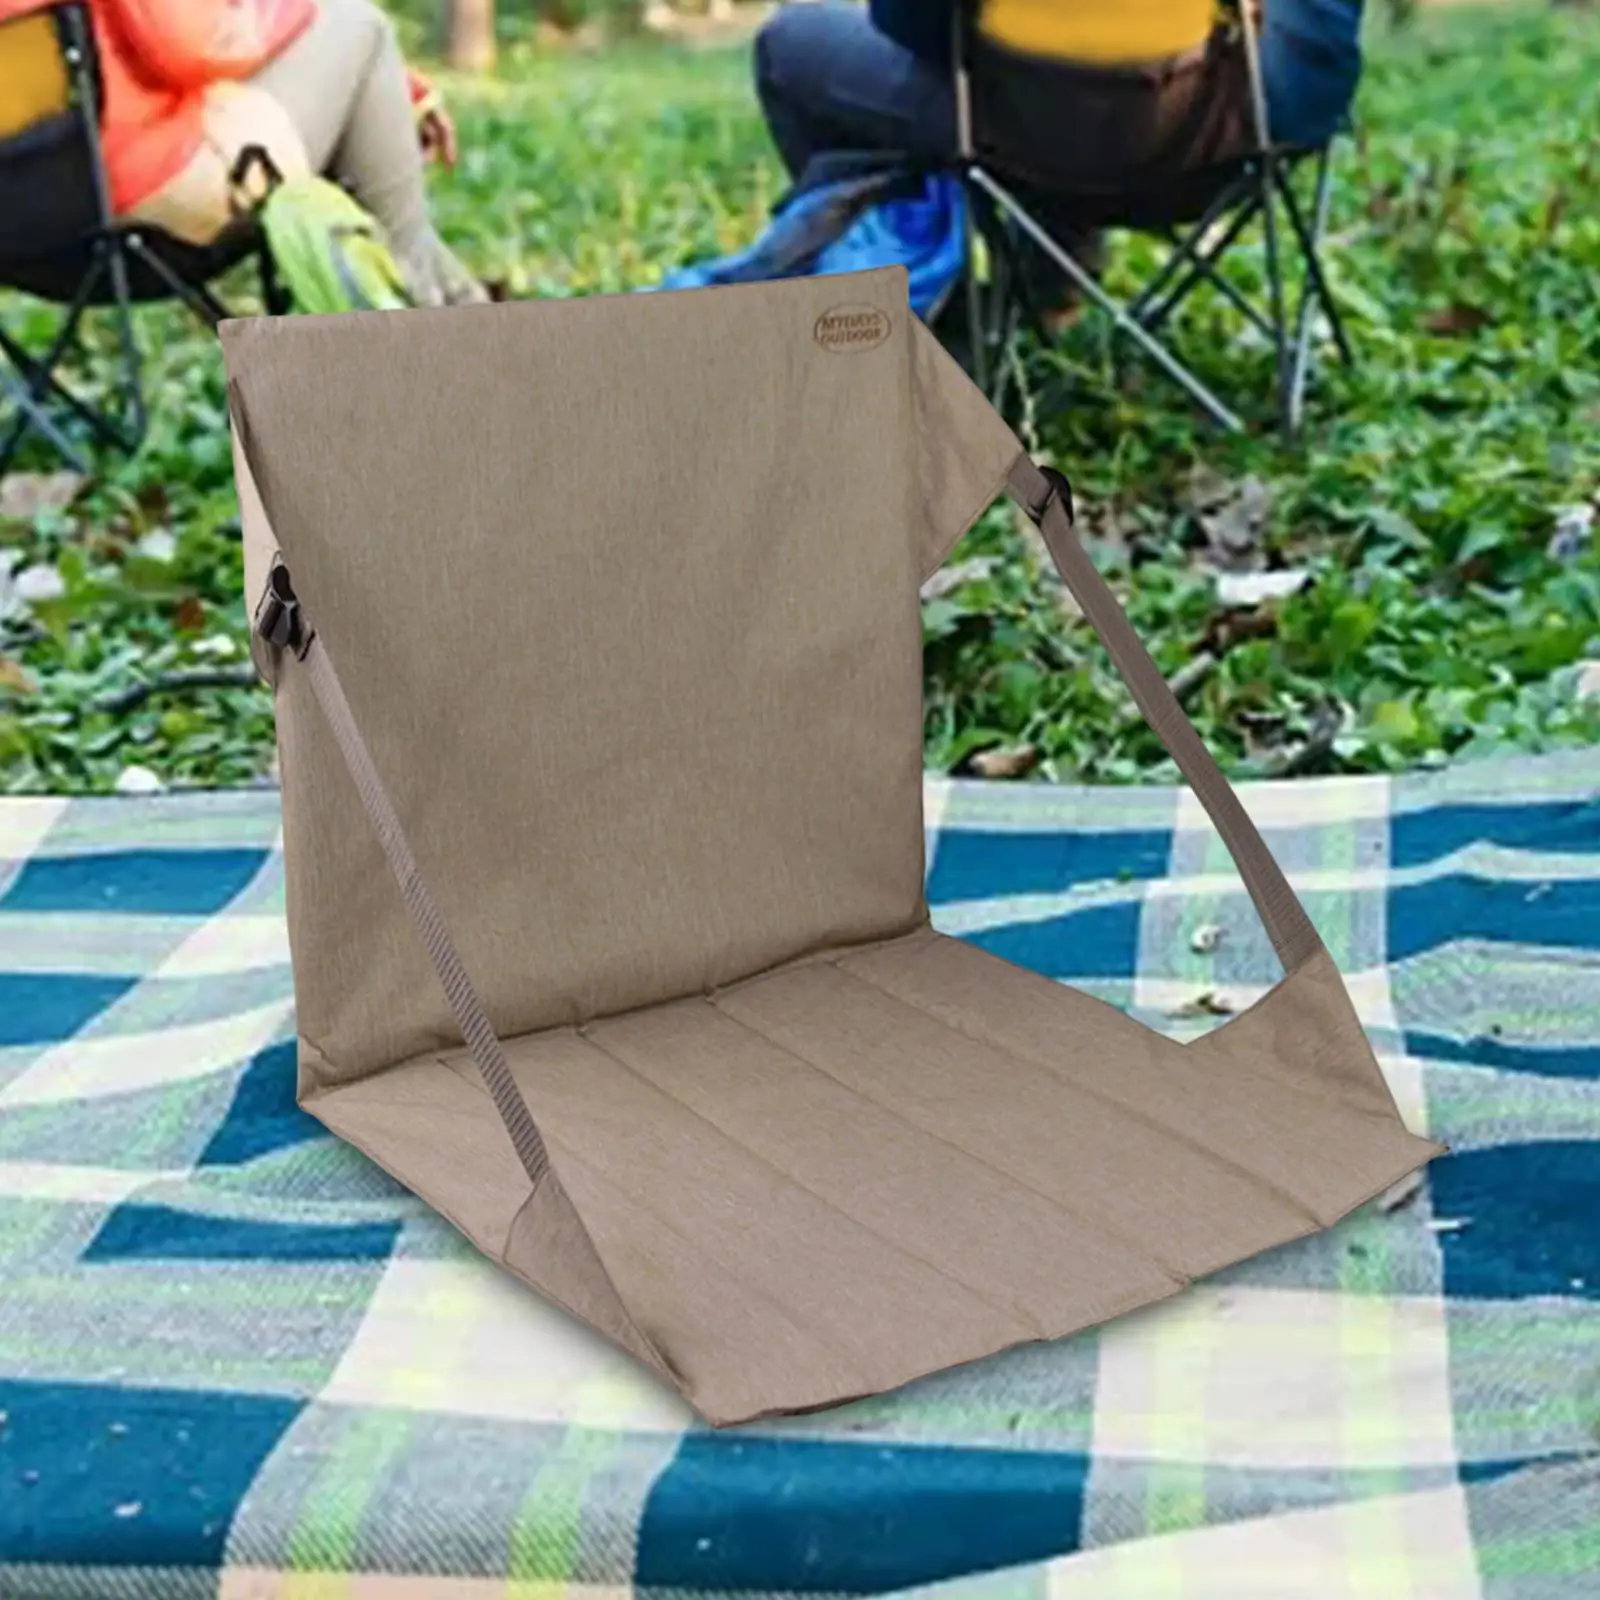 Portable Foldable Seat Cushion Folding Chair Cushion Padded for Outdoor